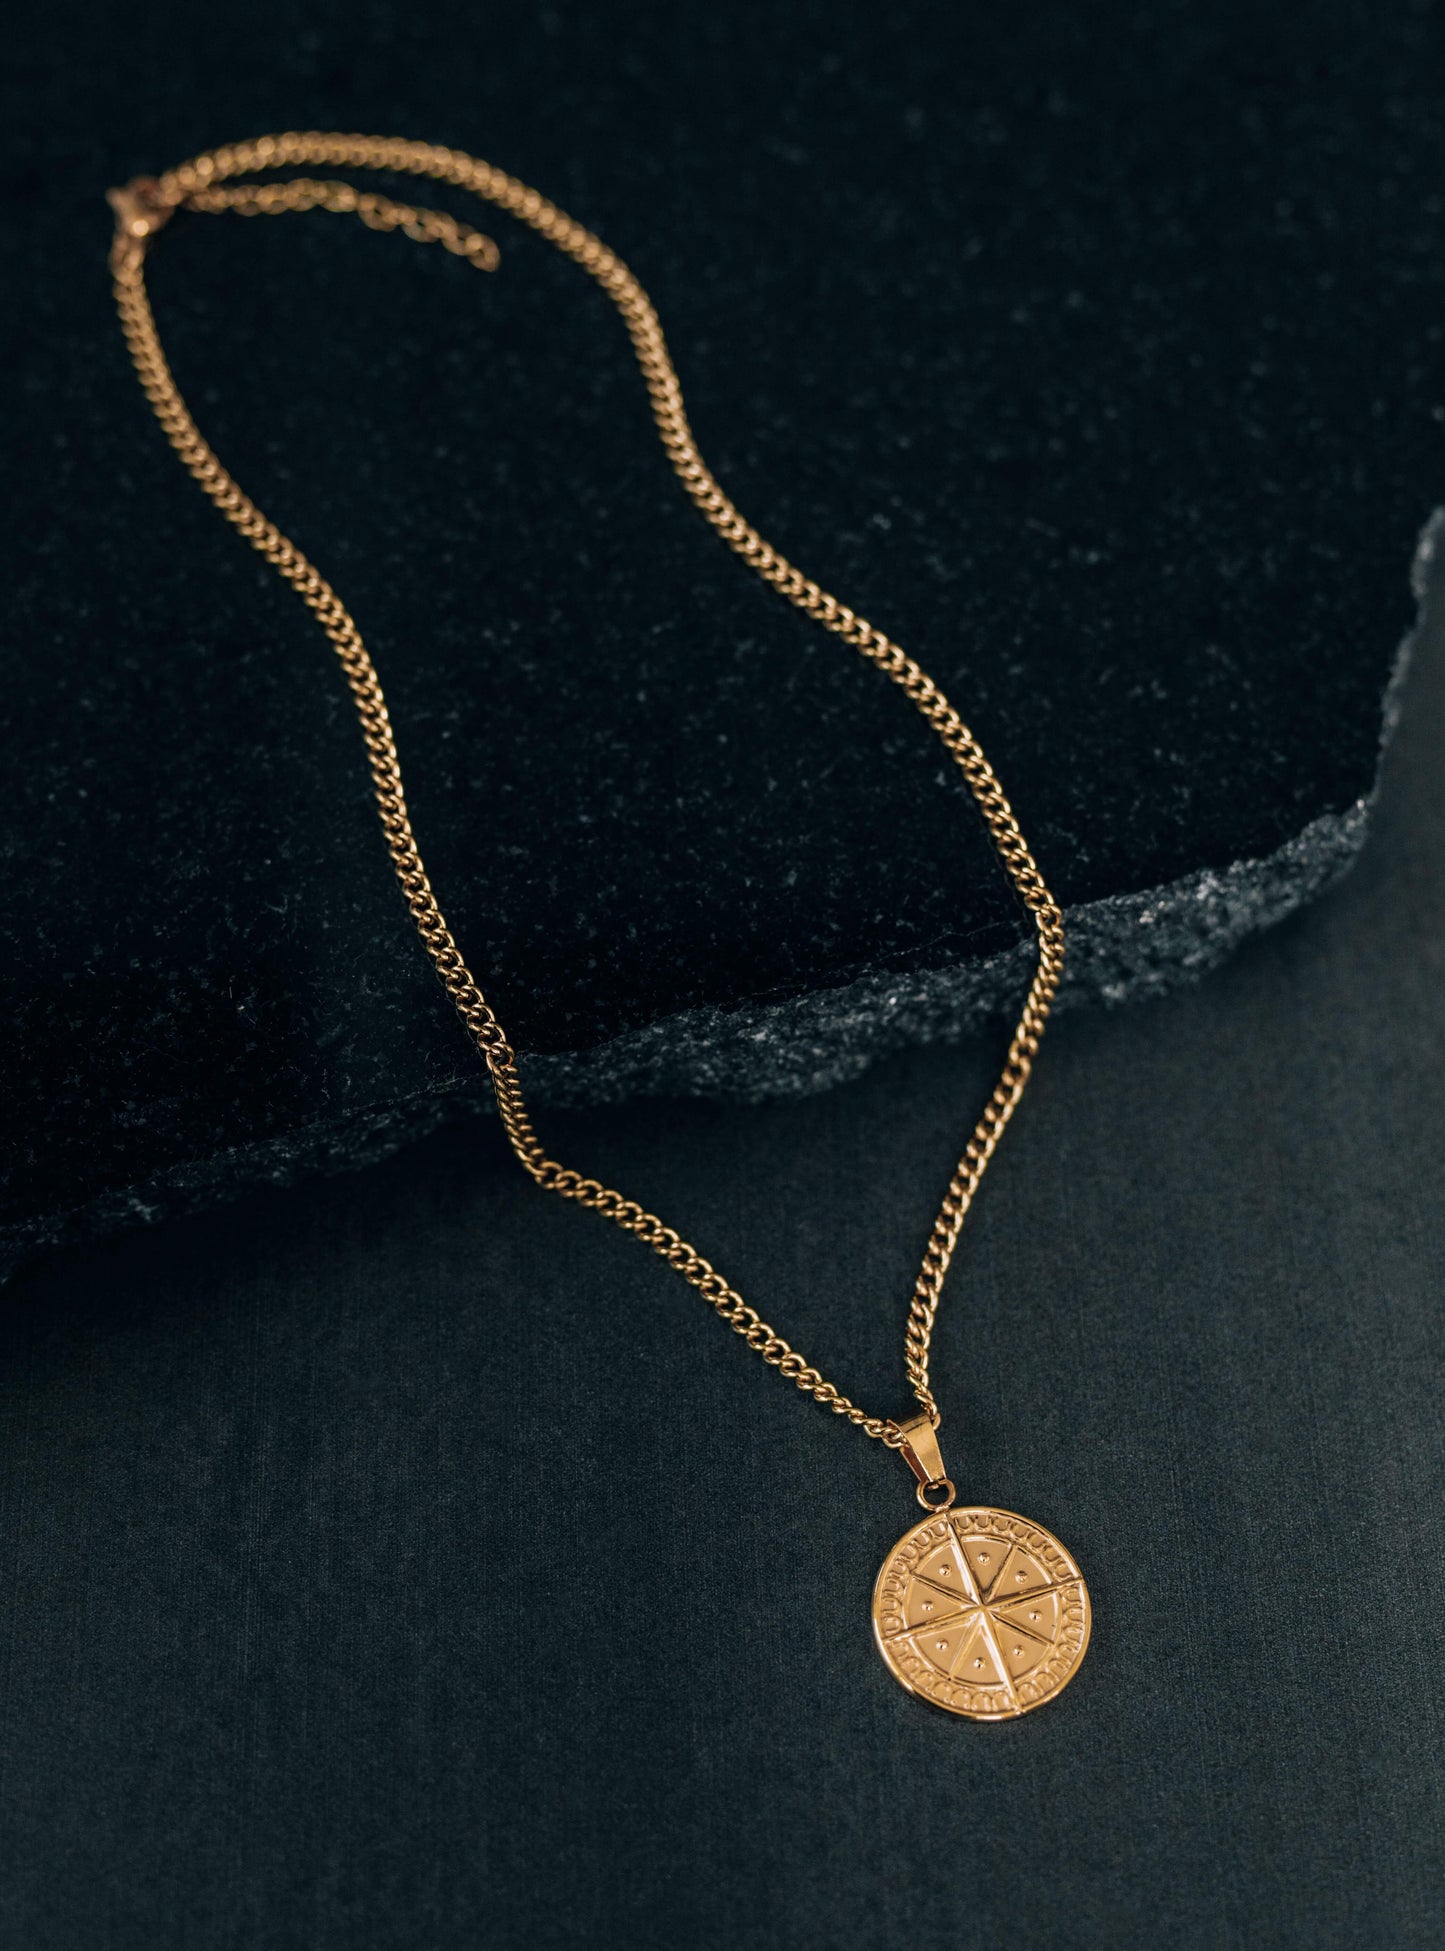 Gold Necklace Set For Men or Women - Compass Coin Pendant Necklace and 5mm Curb Chain